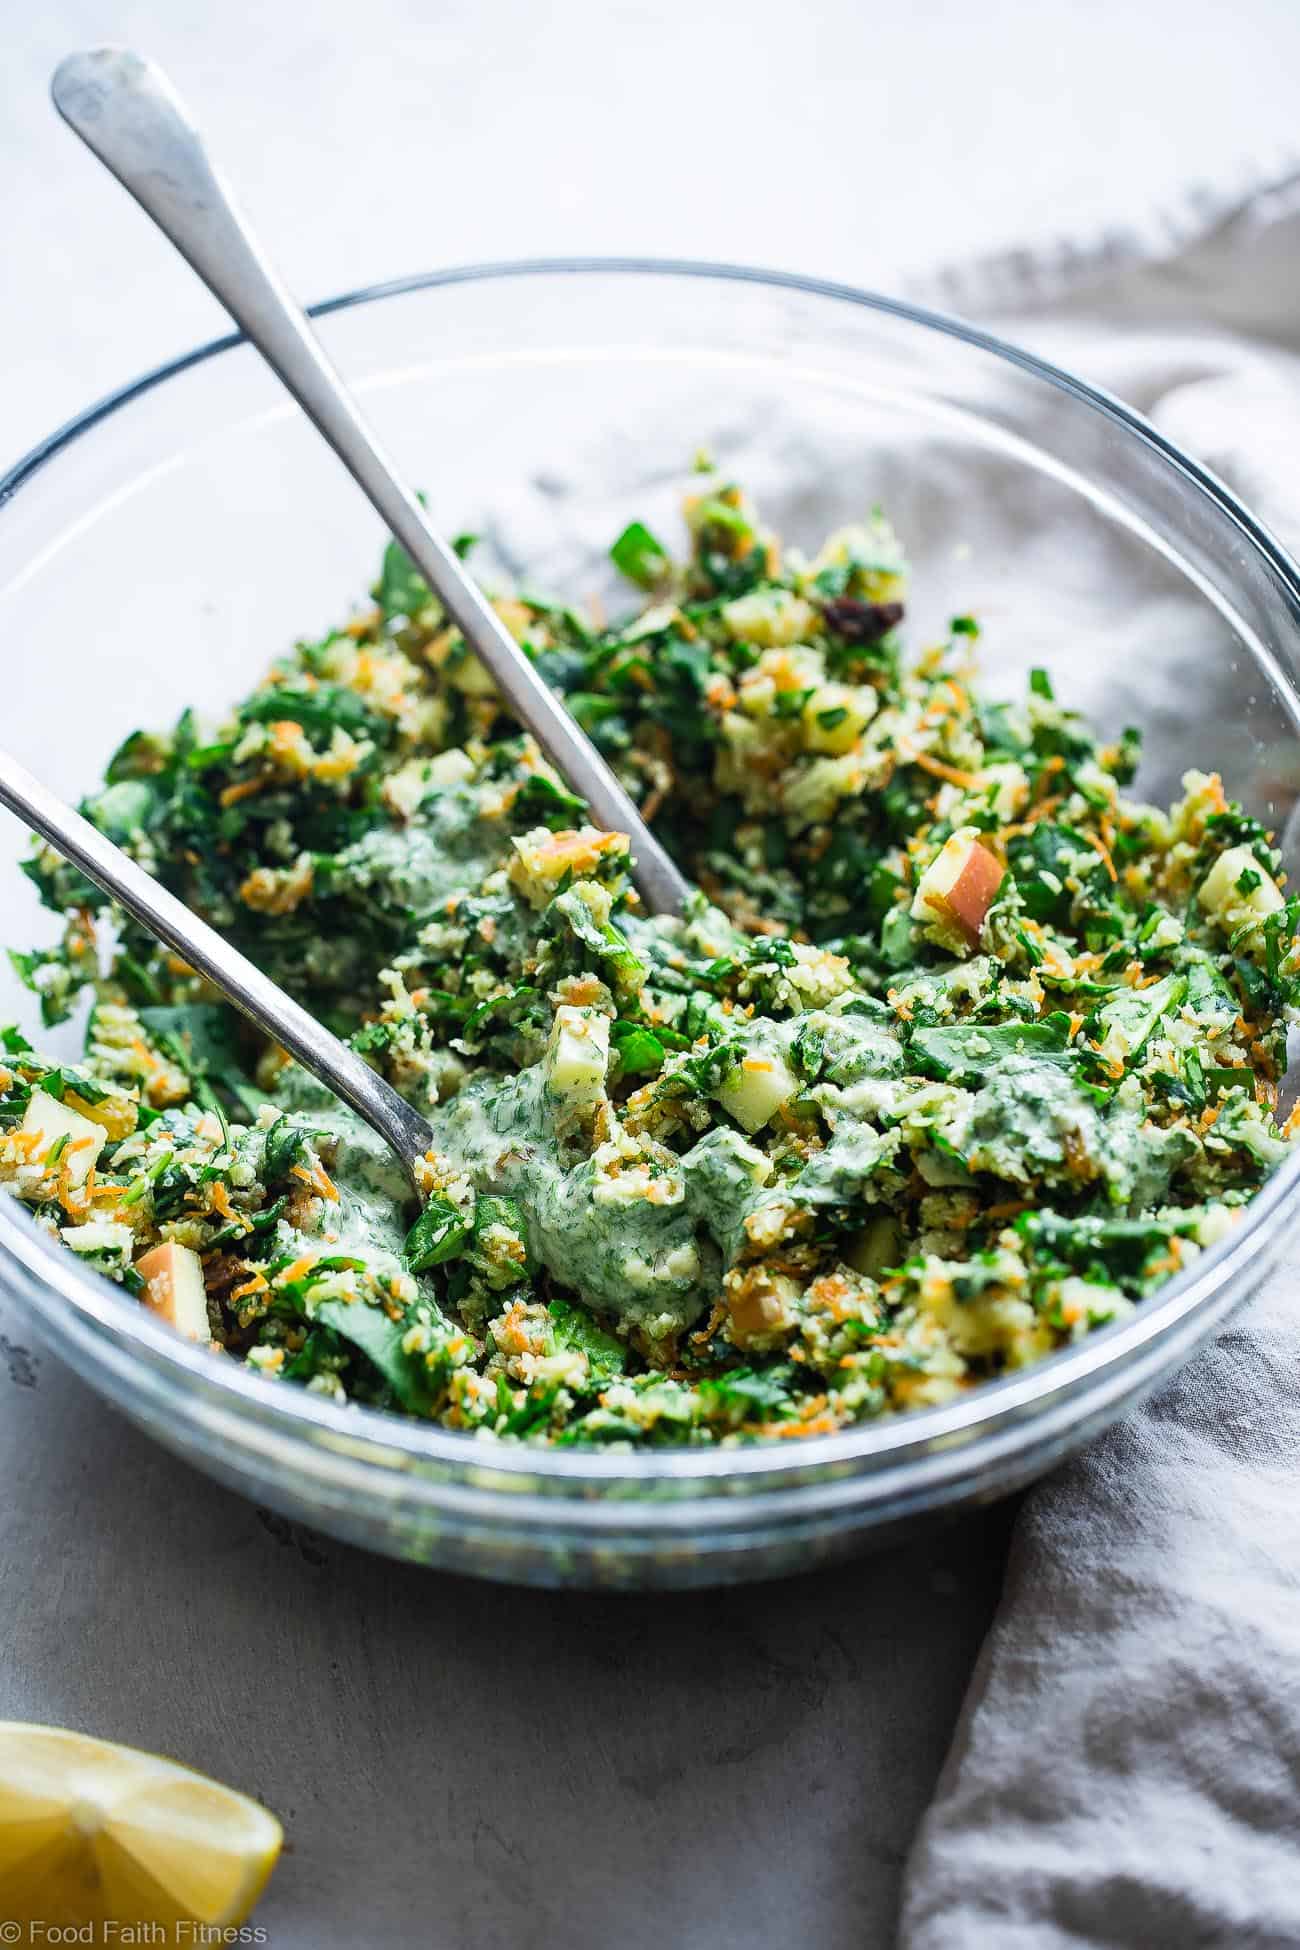 Moroccan Grated Raw Cauliflower Detox Salad - Ever wondered how to make cauliflower salad? This veggie packed salad is a gluten/grain/dairy/sugar free salad with sweet and spicy, bold flavor! Paleo, vegan and whole30 compliant and perfect for meal prep! | Foodfaithfitness.com | @FoodfaithFit